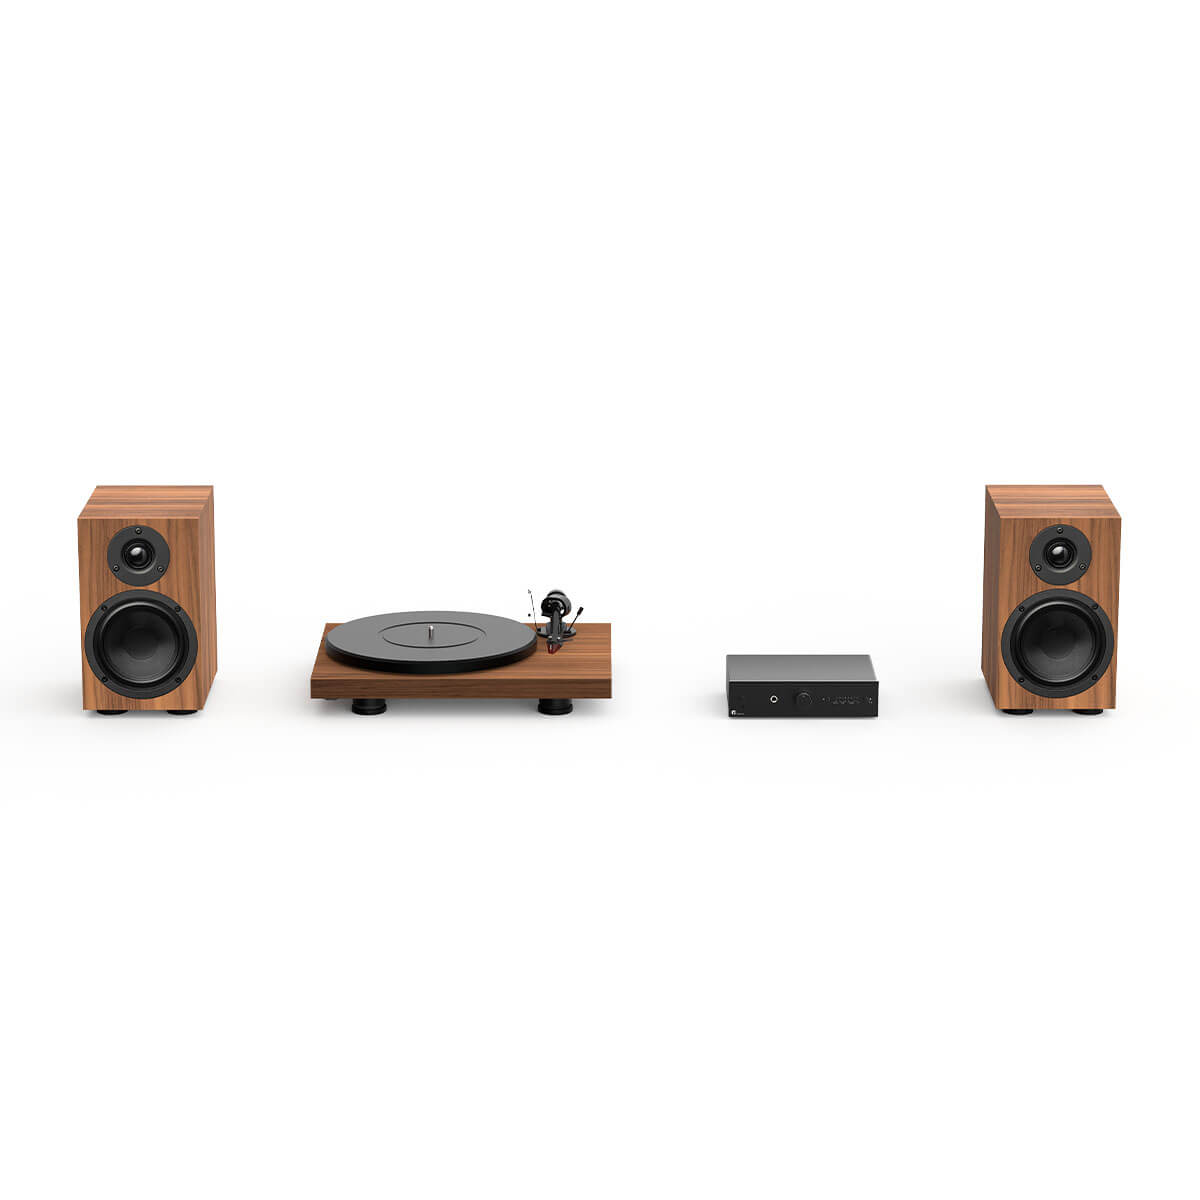 Photos - Other for Hi-Fi and Hi-End Pro-Ject Colourful Audio System Walnut debutcarbon-evo-system-swn 